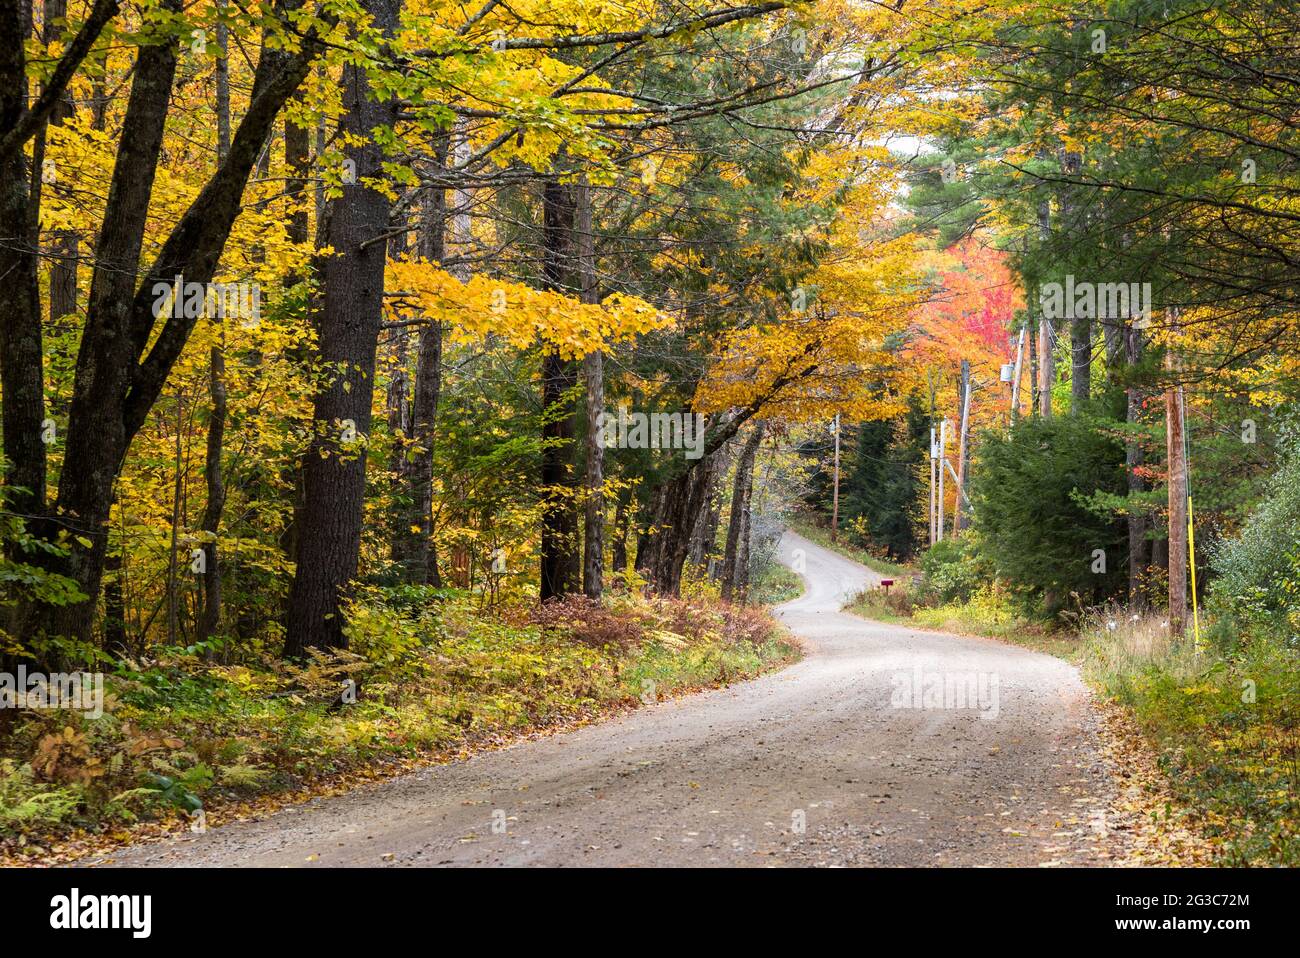 Deserted winding forest road  in the mountains in autumn. Beautiful fall foliage. Stock Photo